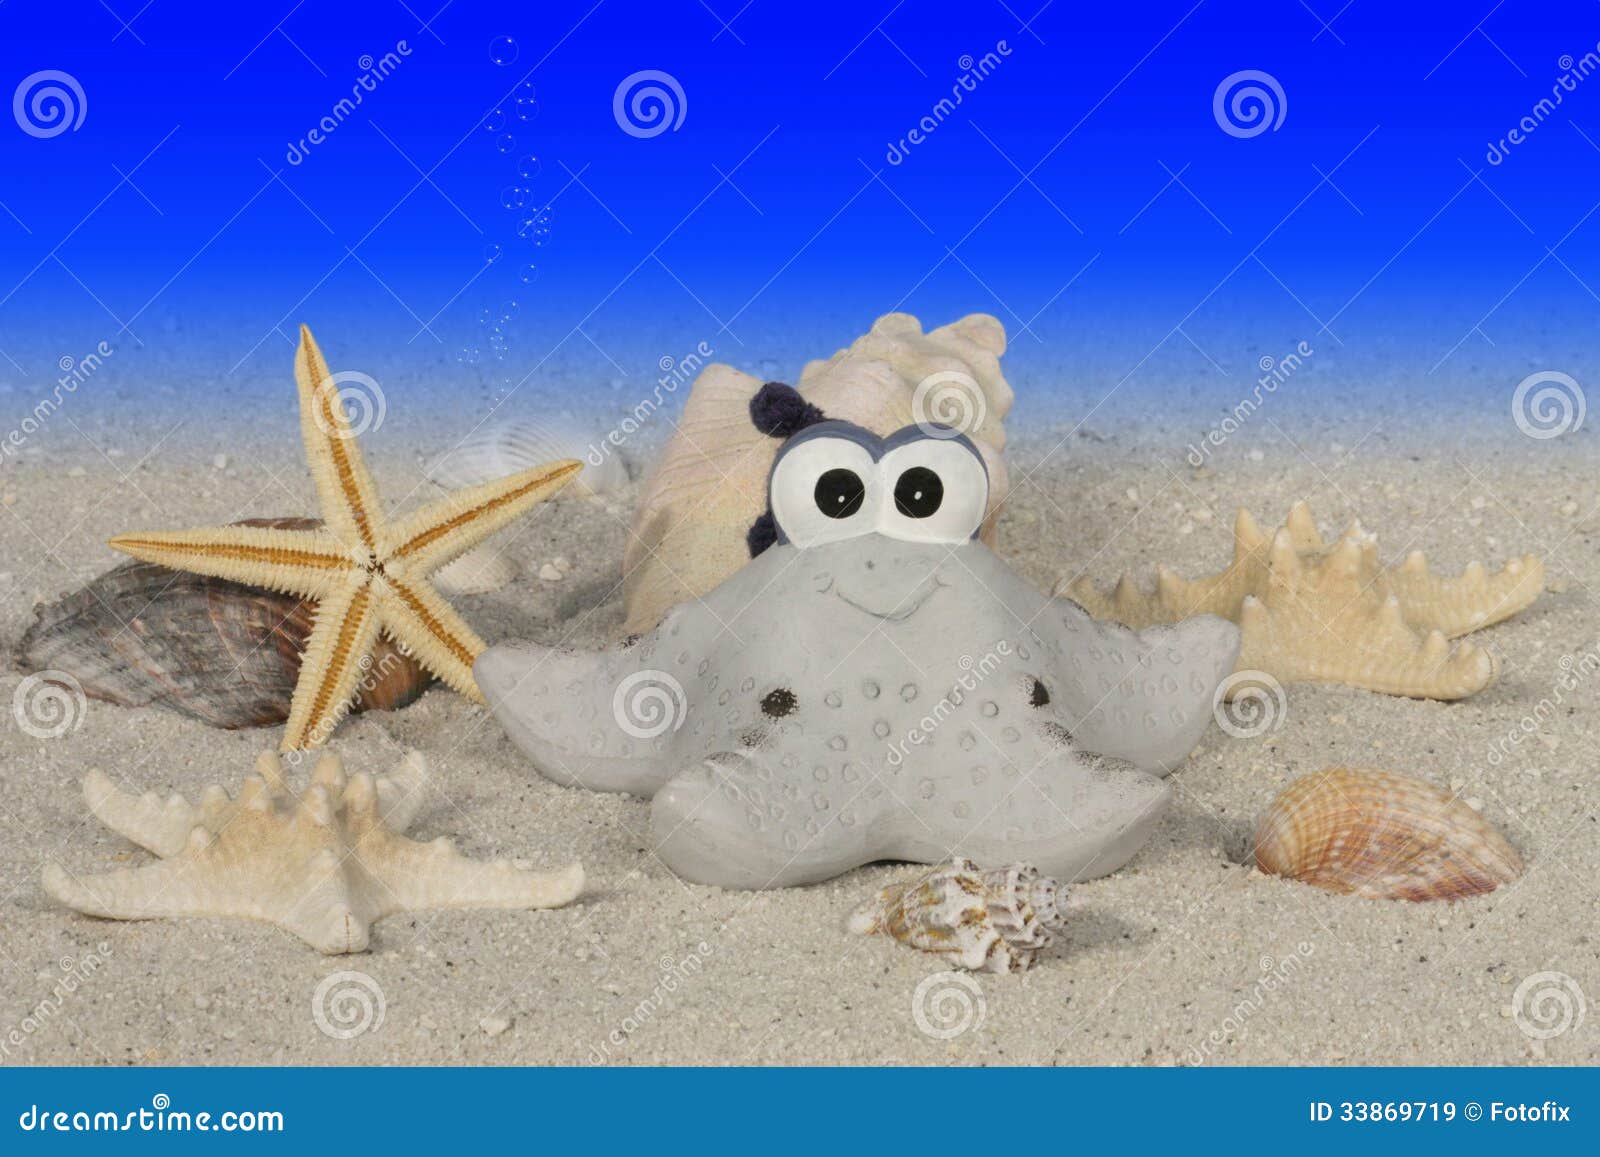 Funny starfish under water stock image. Image of greetingcard - 33869719